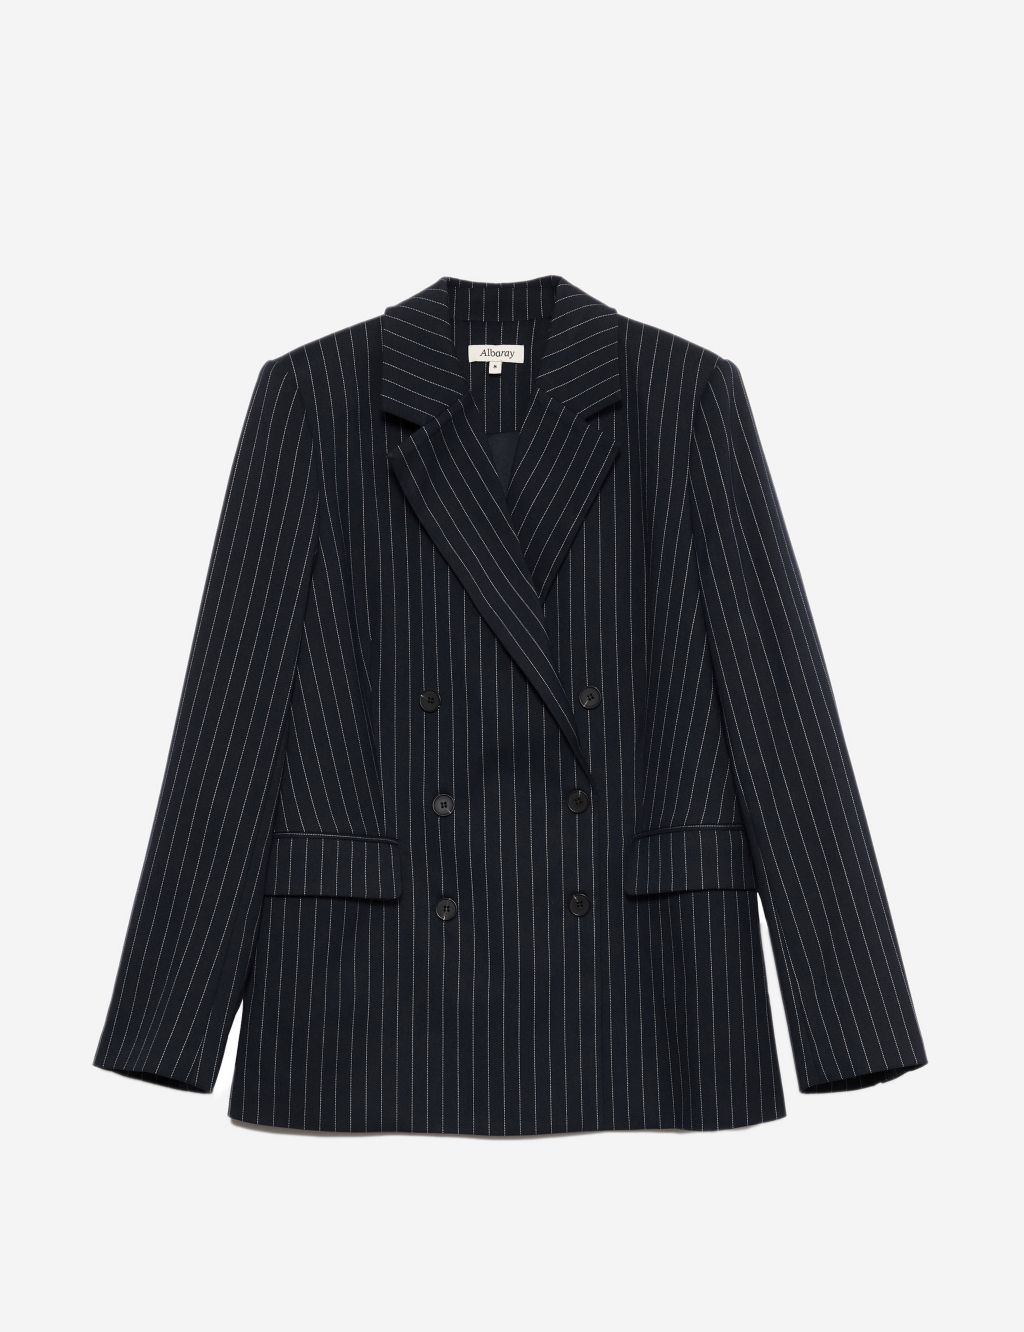 Pinstripe Double Breasted Blazer image 2